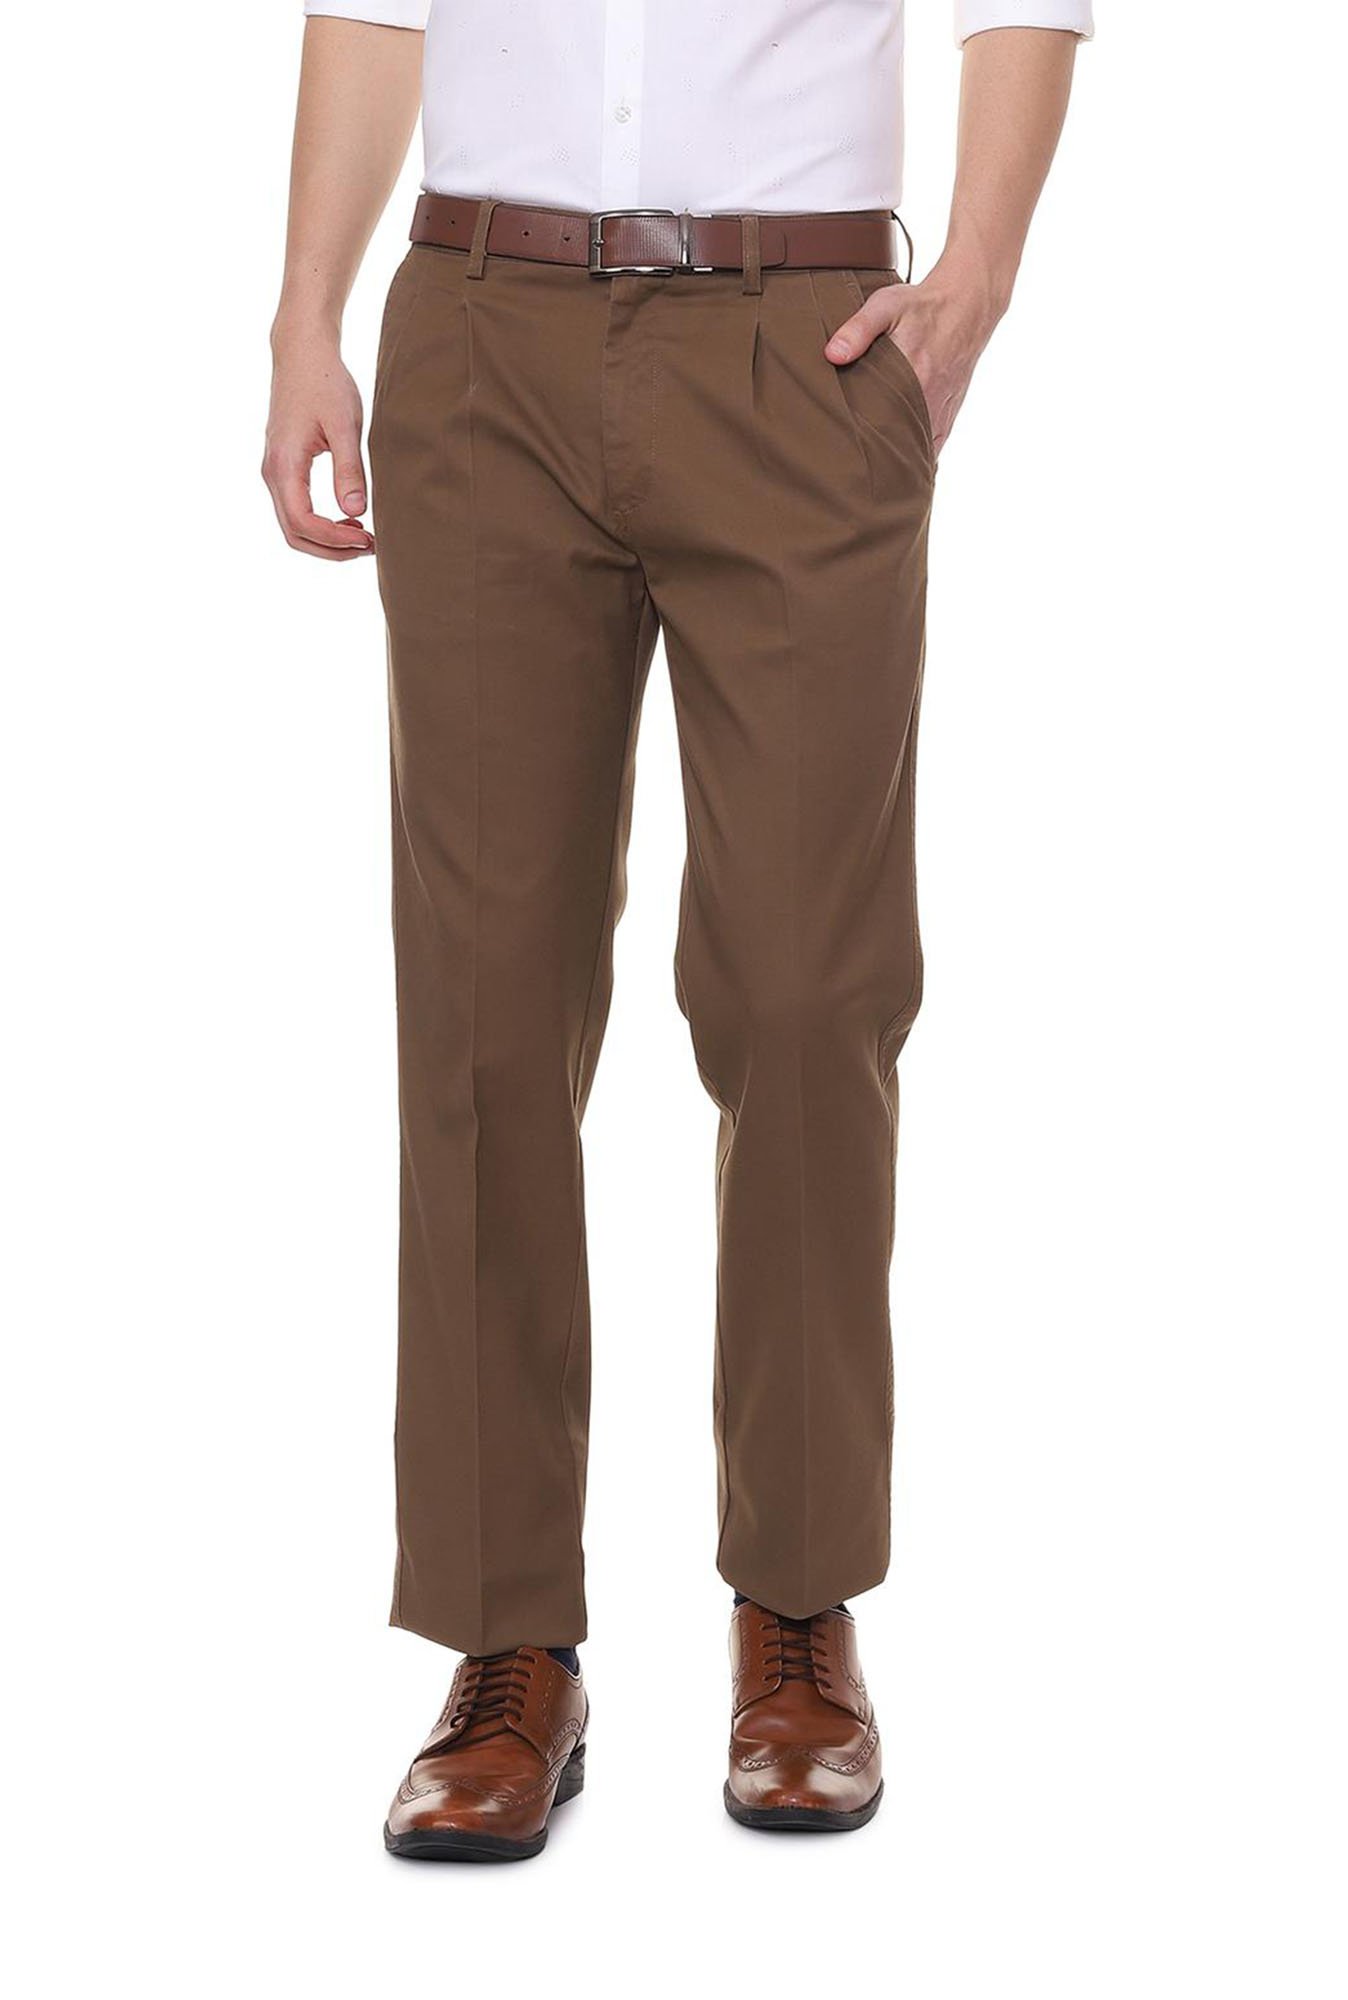 Allen Solly Trousers and Pants  Buy Allen Solly Women White Regular Fit  Solid Casual Trousers Online  Nykaa Fashion